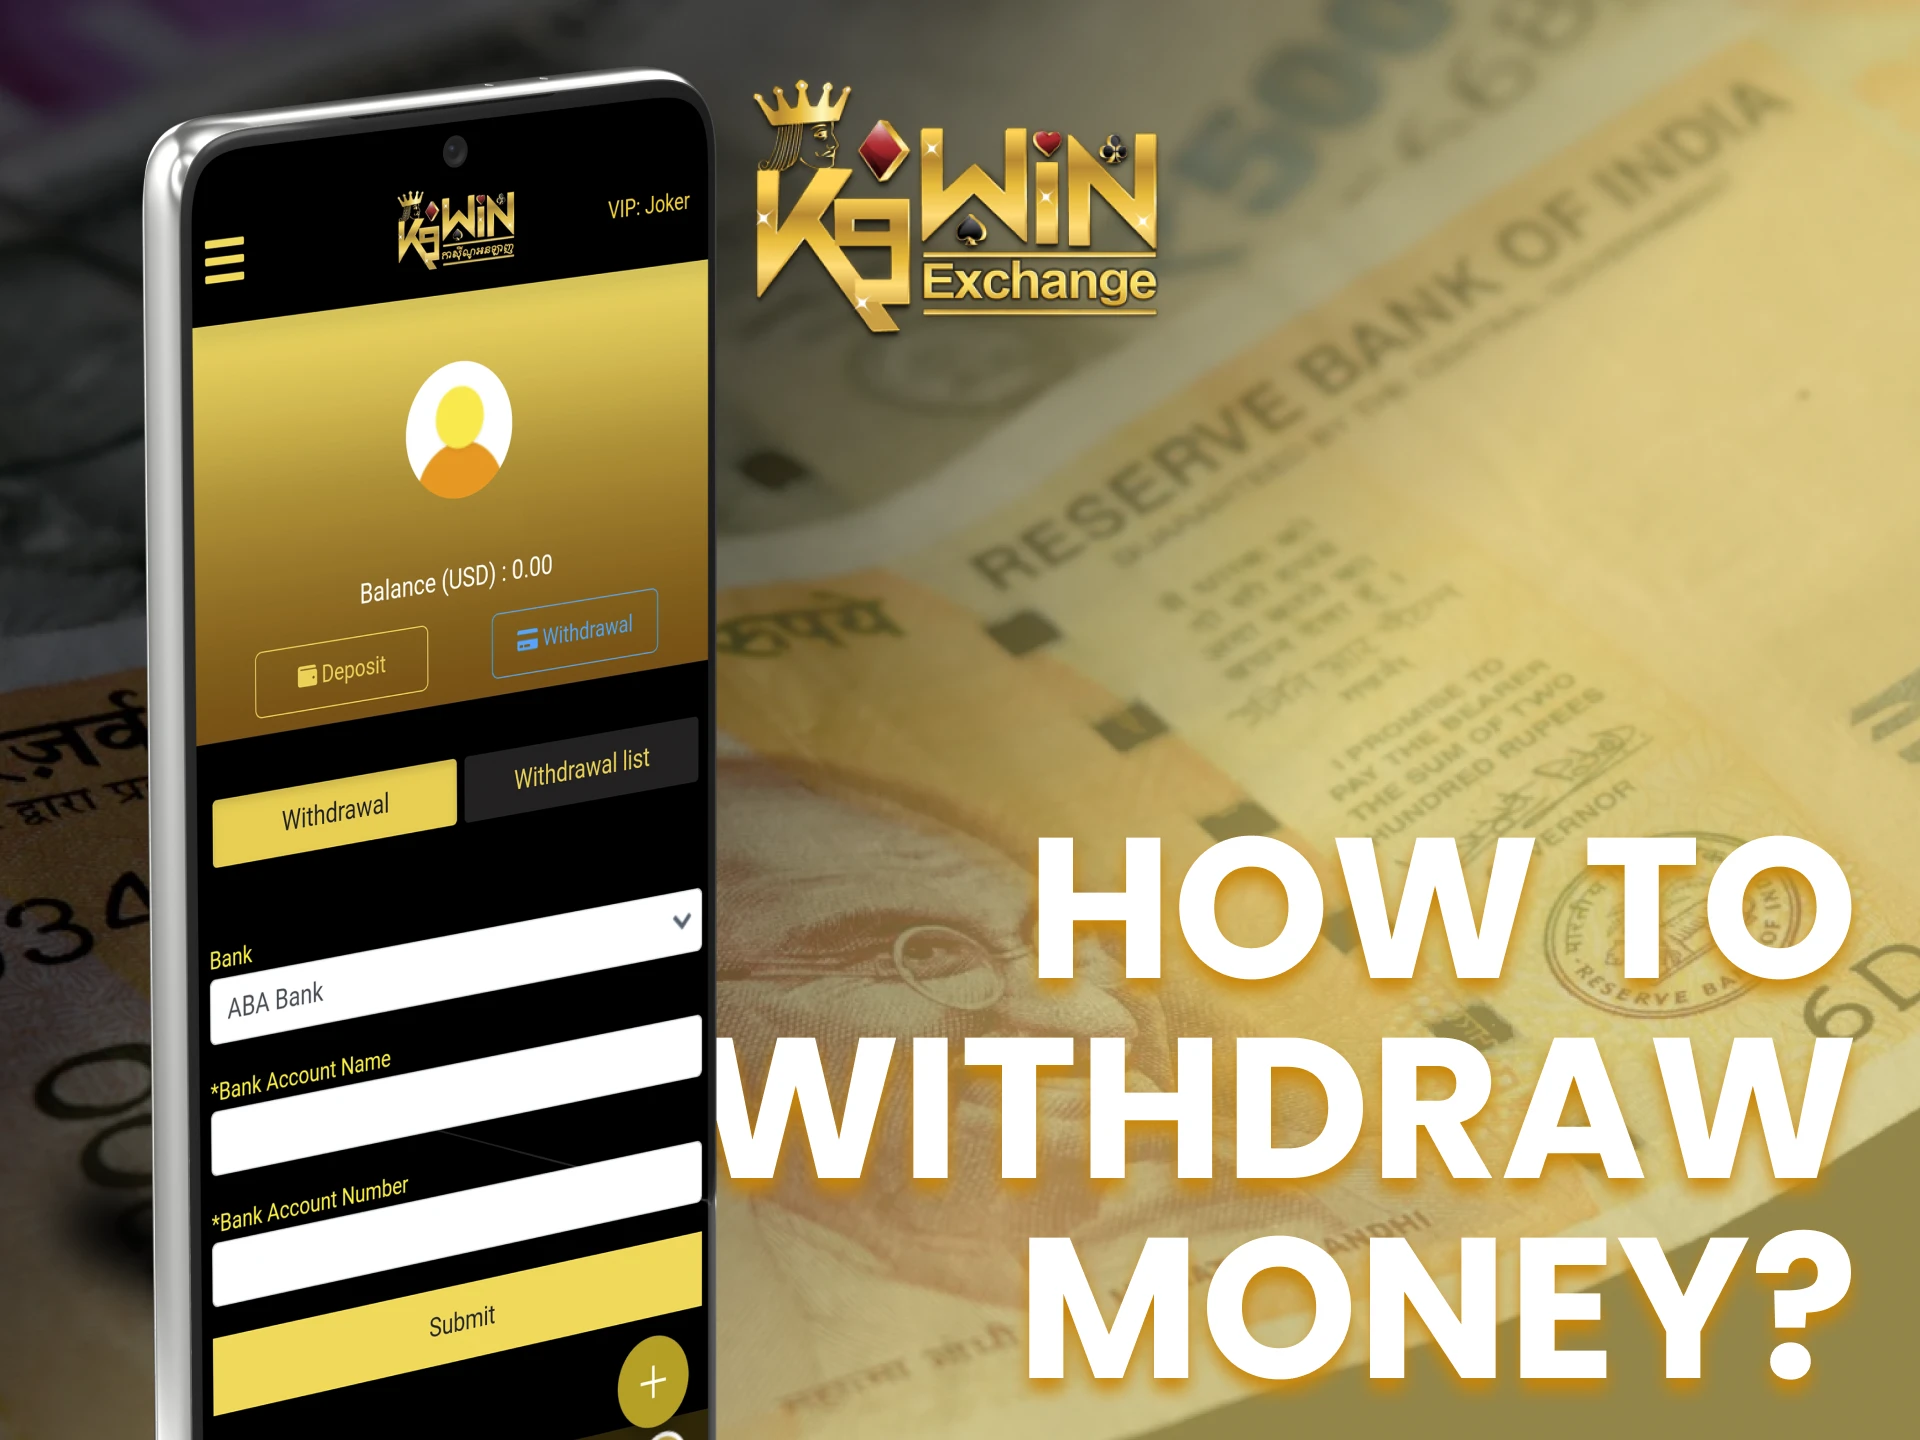 Withdraw money faster by using the K9Win app.